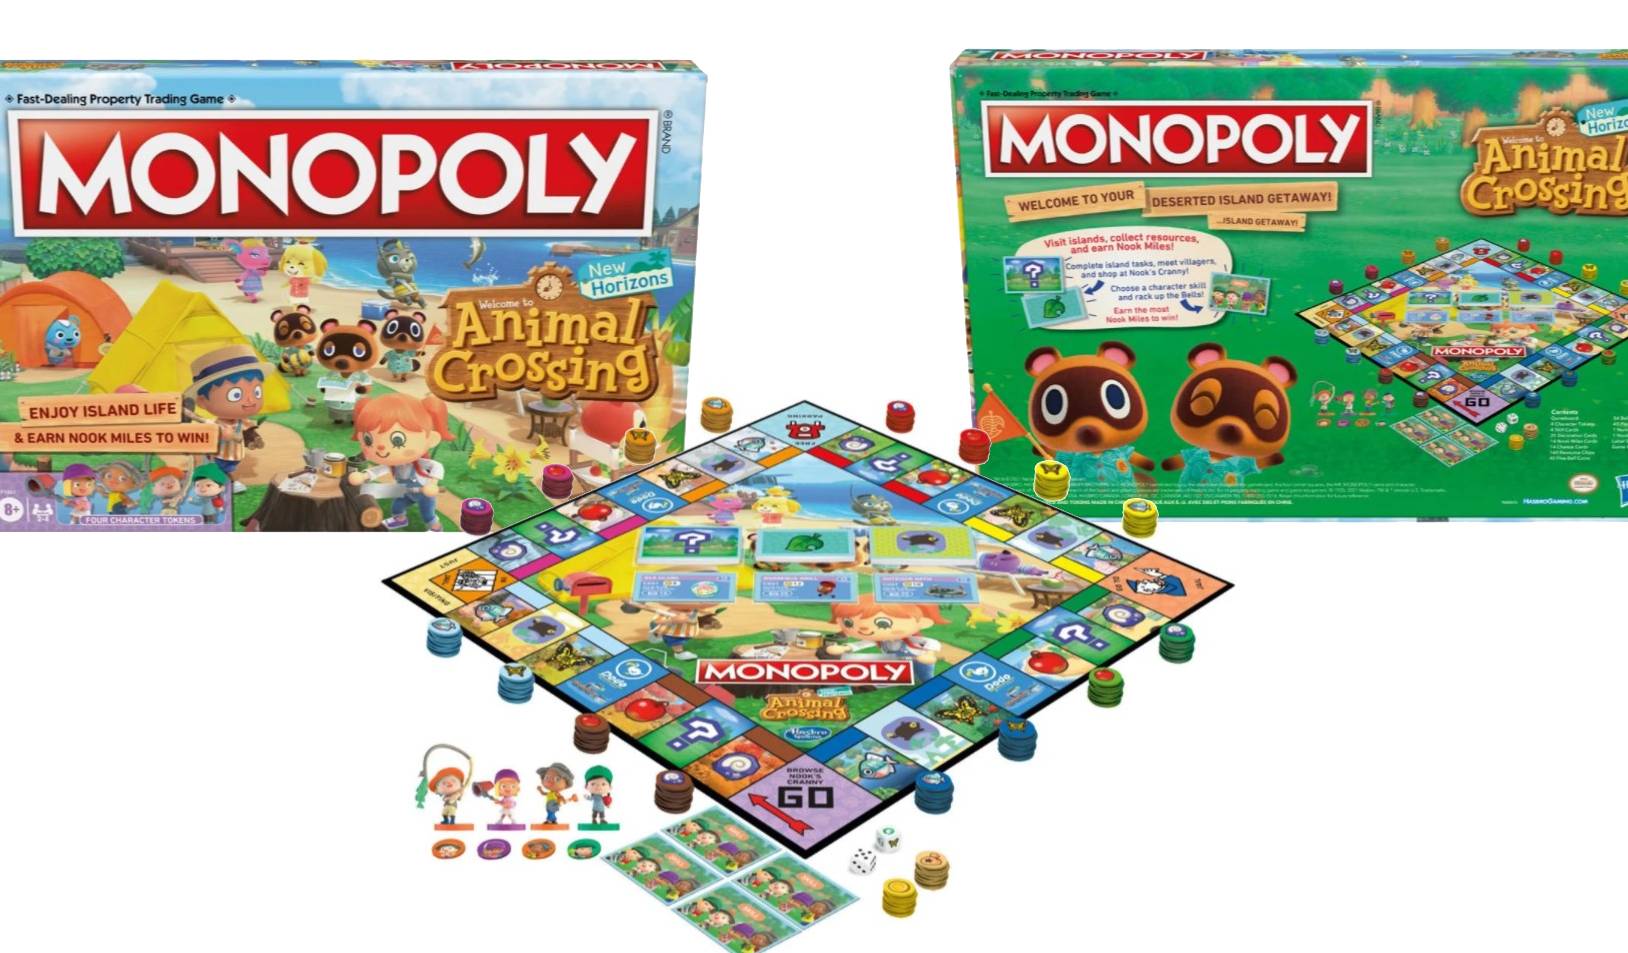 Monopoly Animal Crossing - Recensione